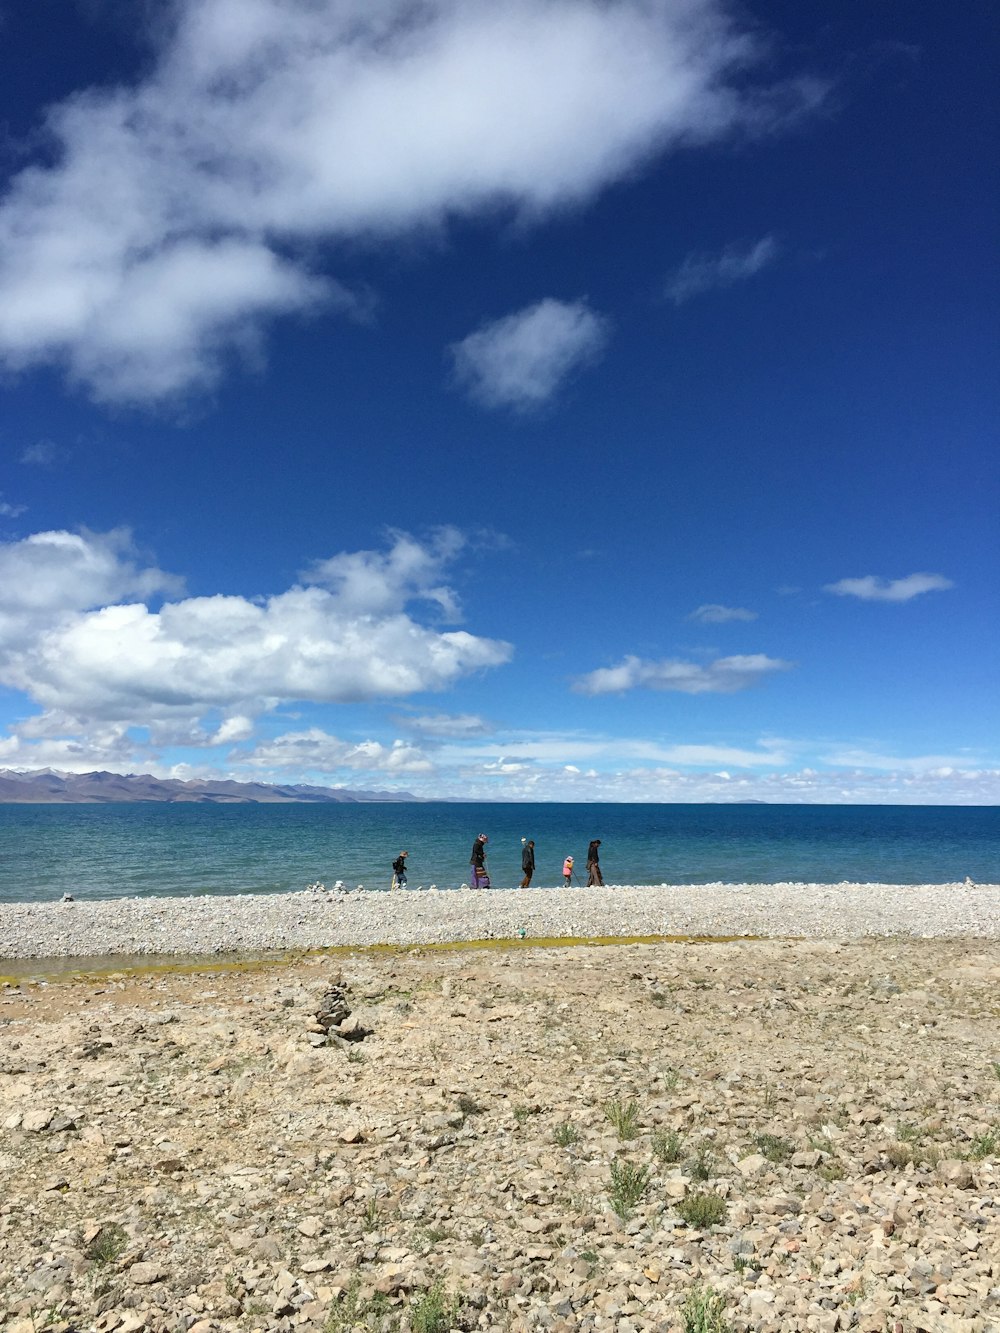 people on beach under blue sky and white clouds during daytime